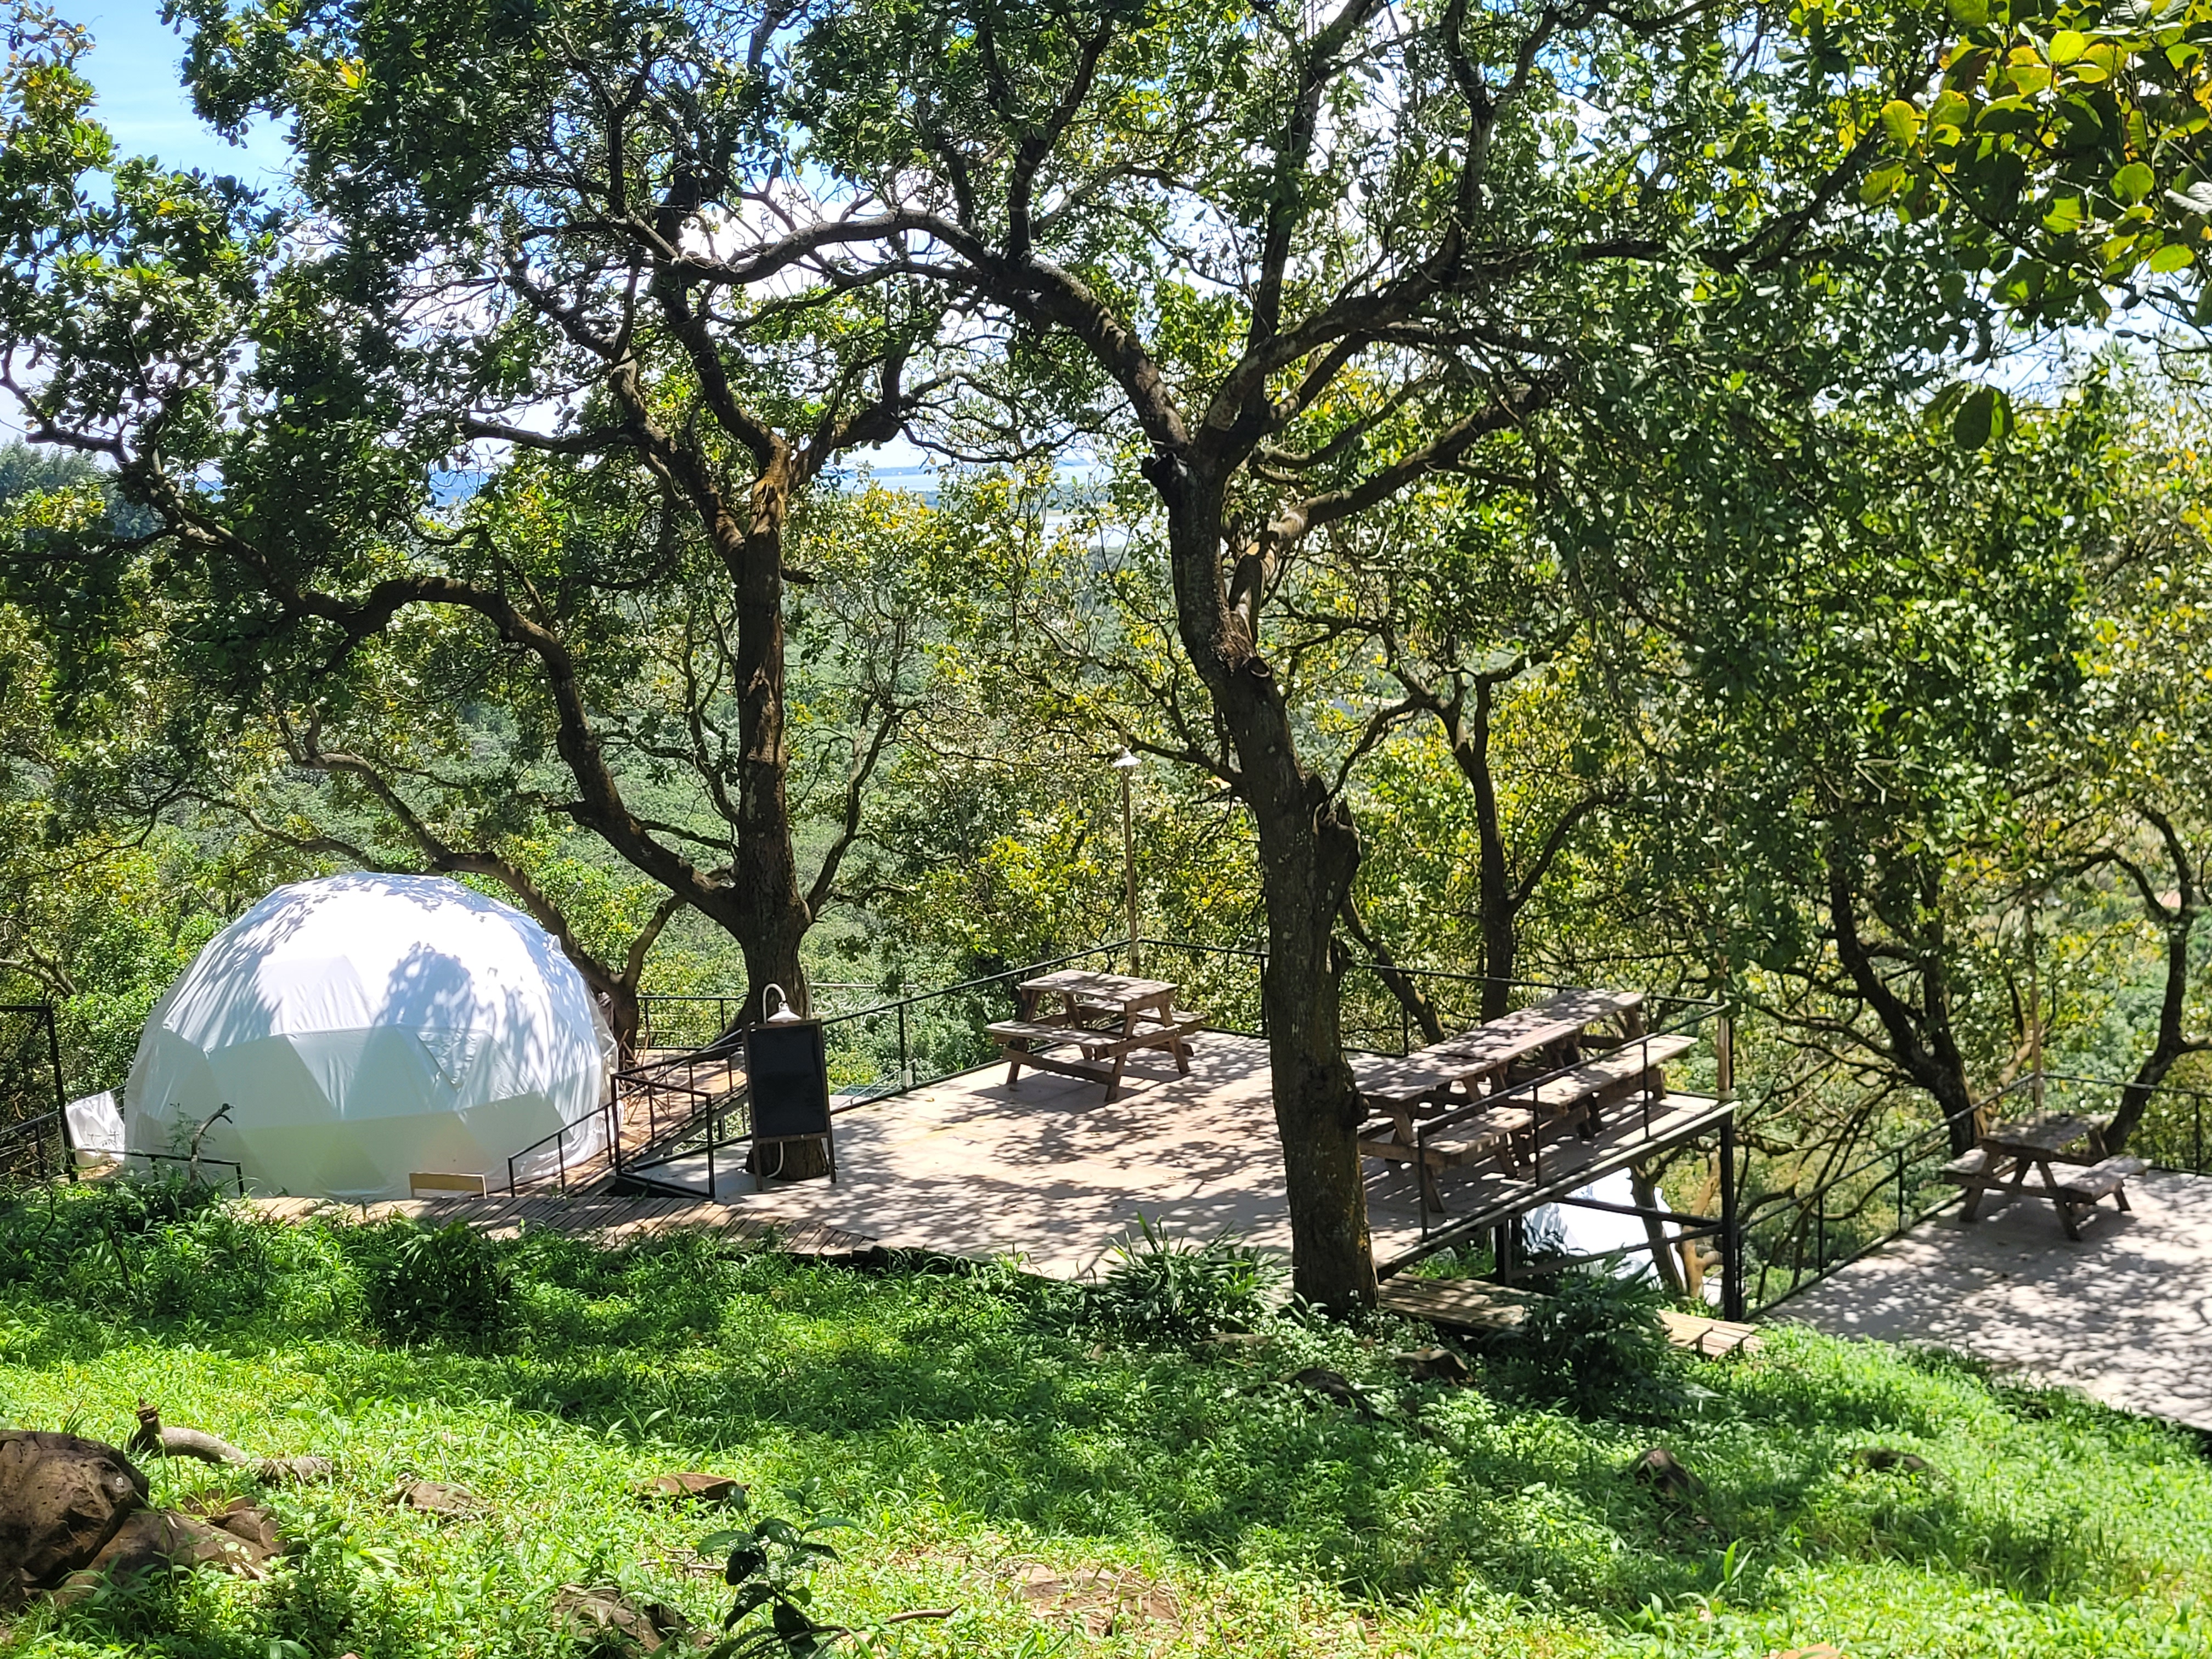 A dome-shaped tent at Tropical EGlamping, a glamping site in the southern province of Dong Nai. Photo: Ray Kuschert / Tuoi Tre News